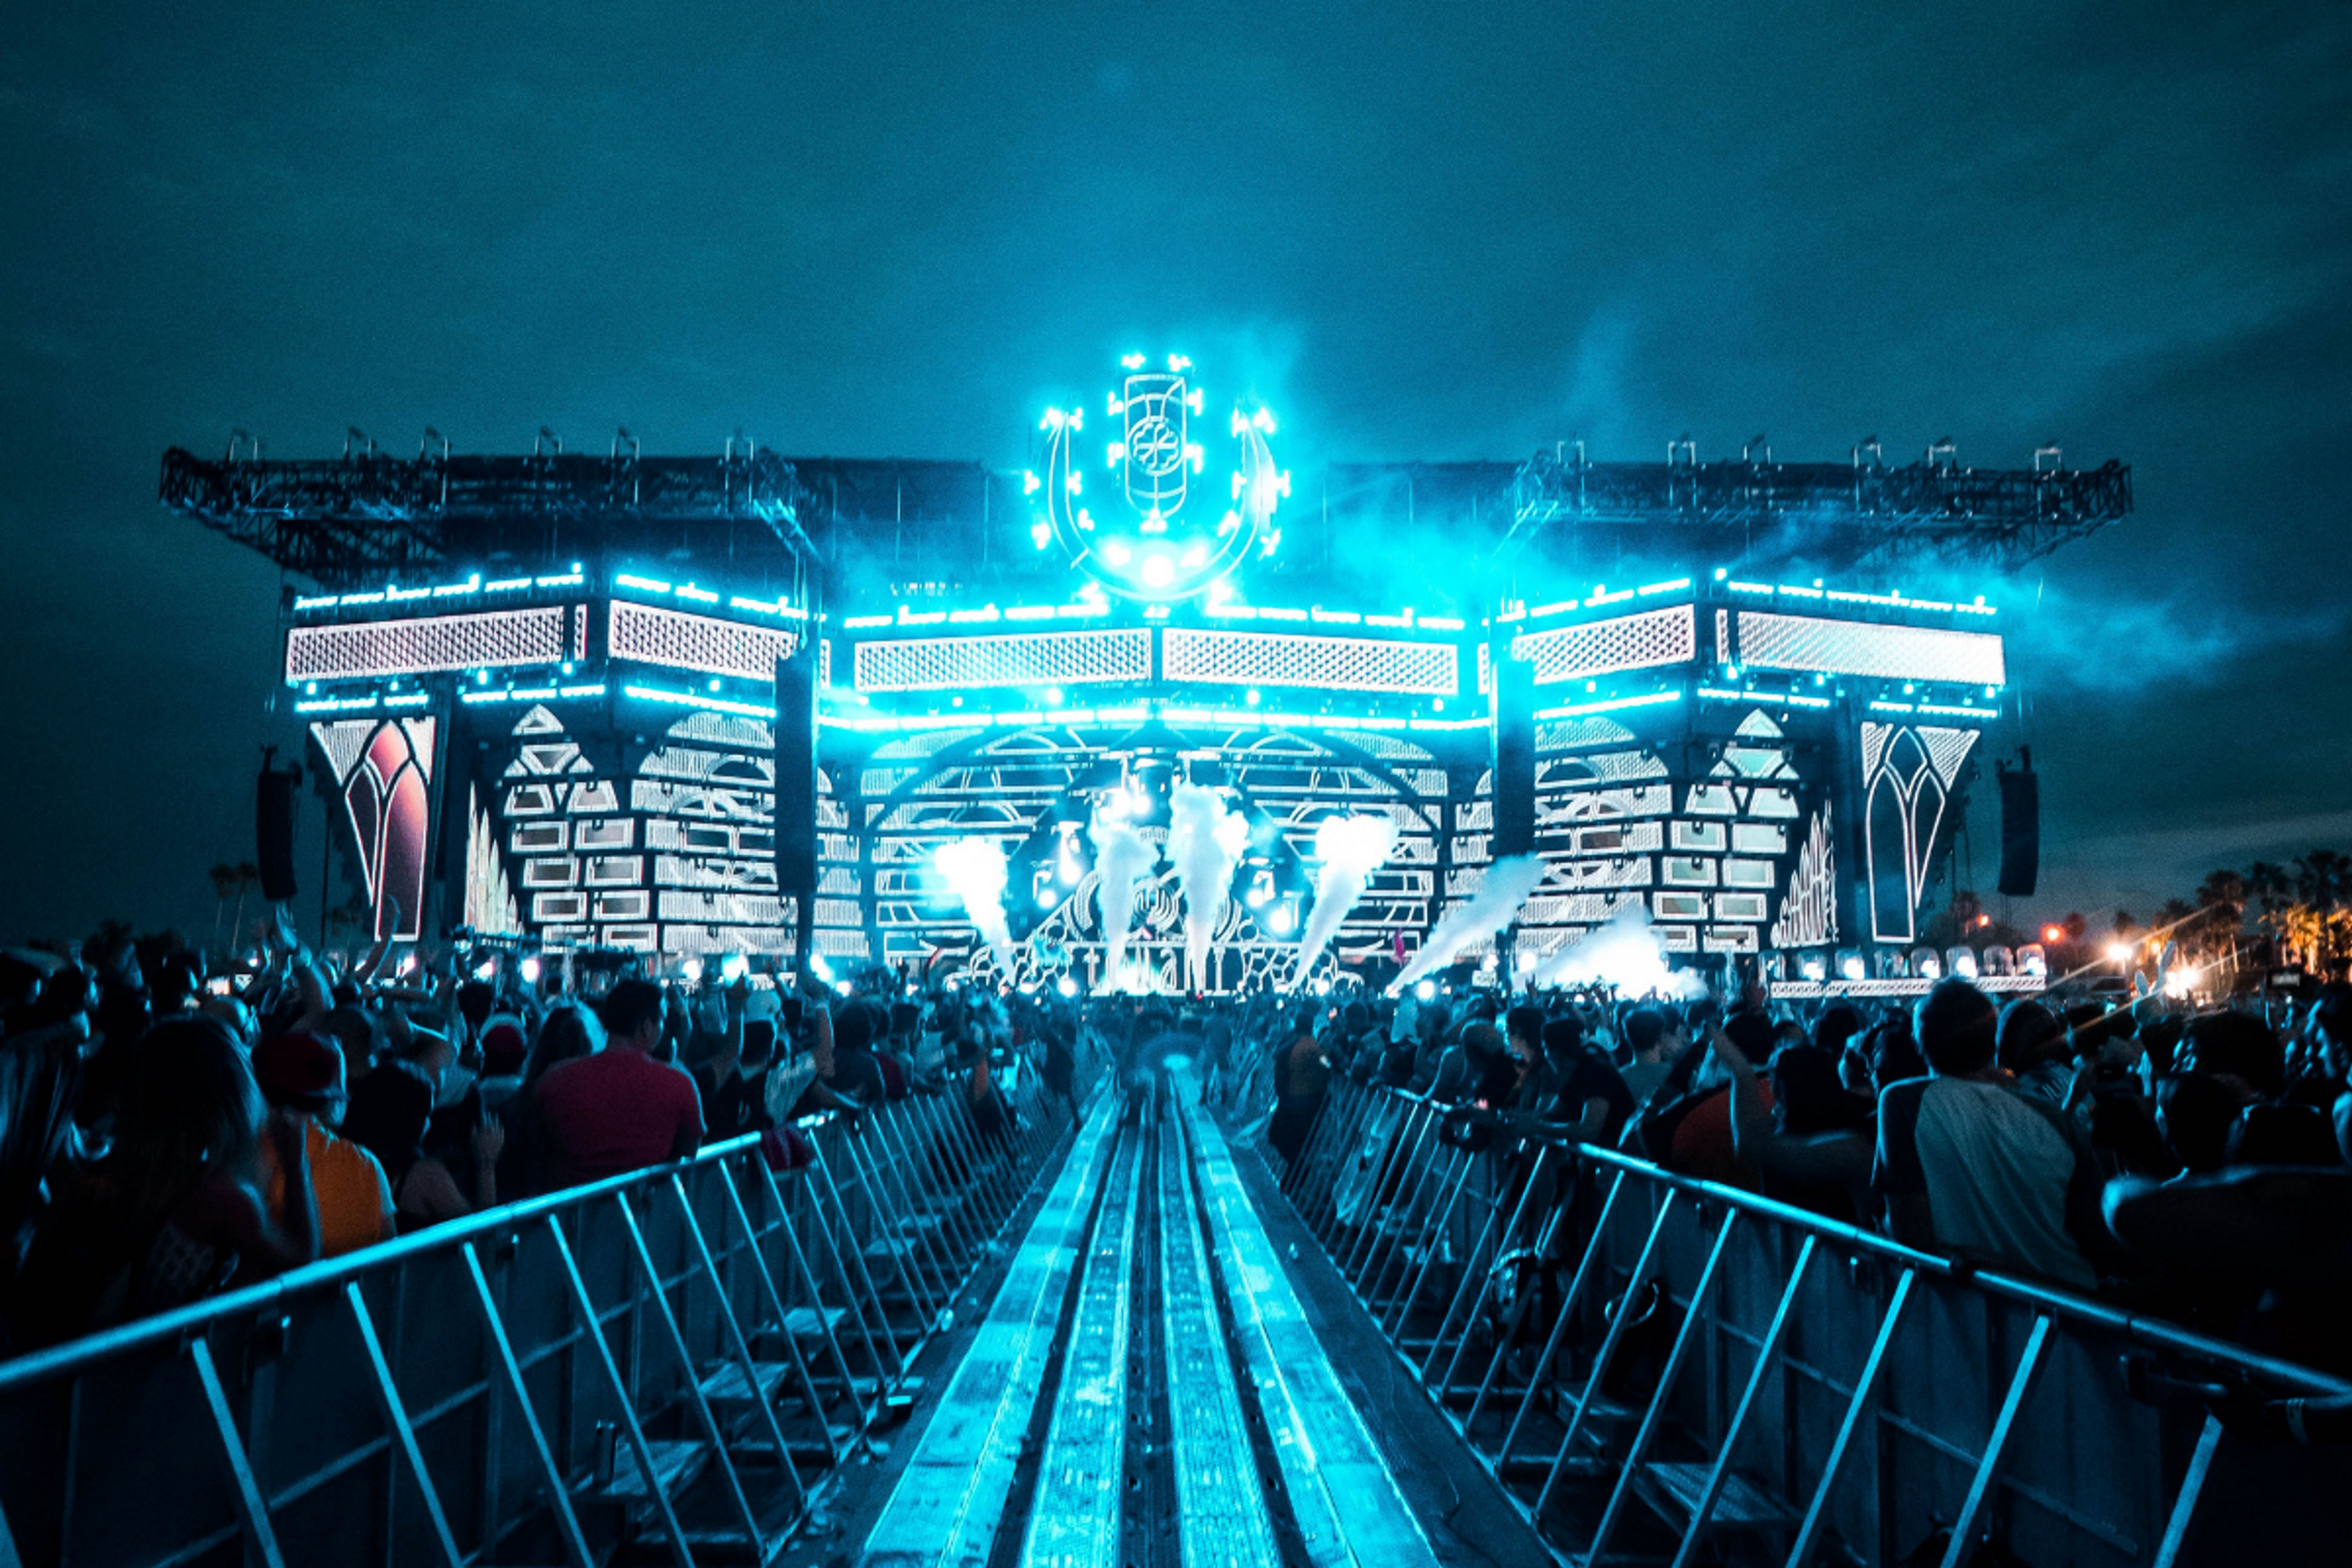 Ultra festival's stage